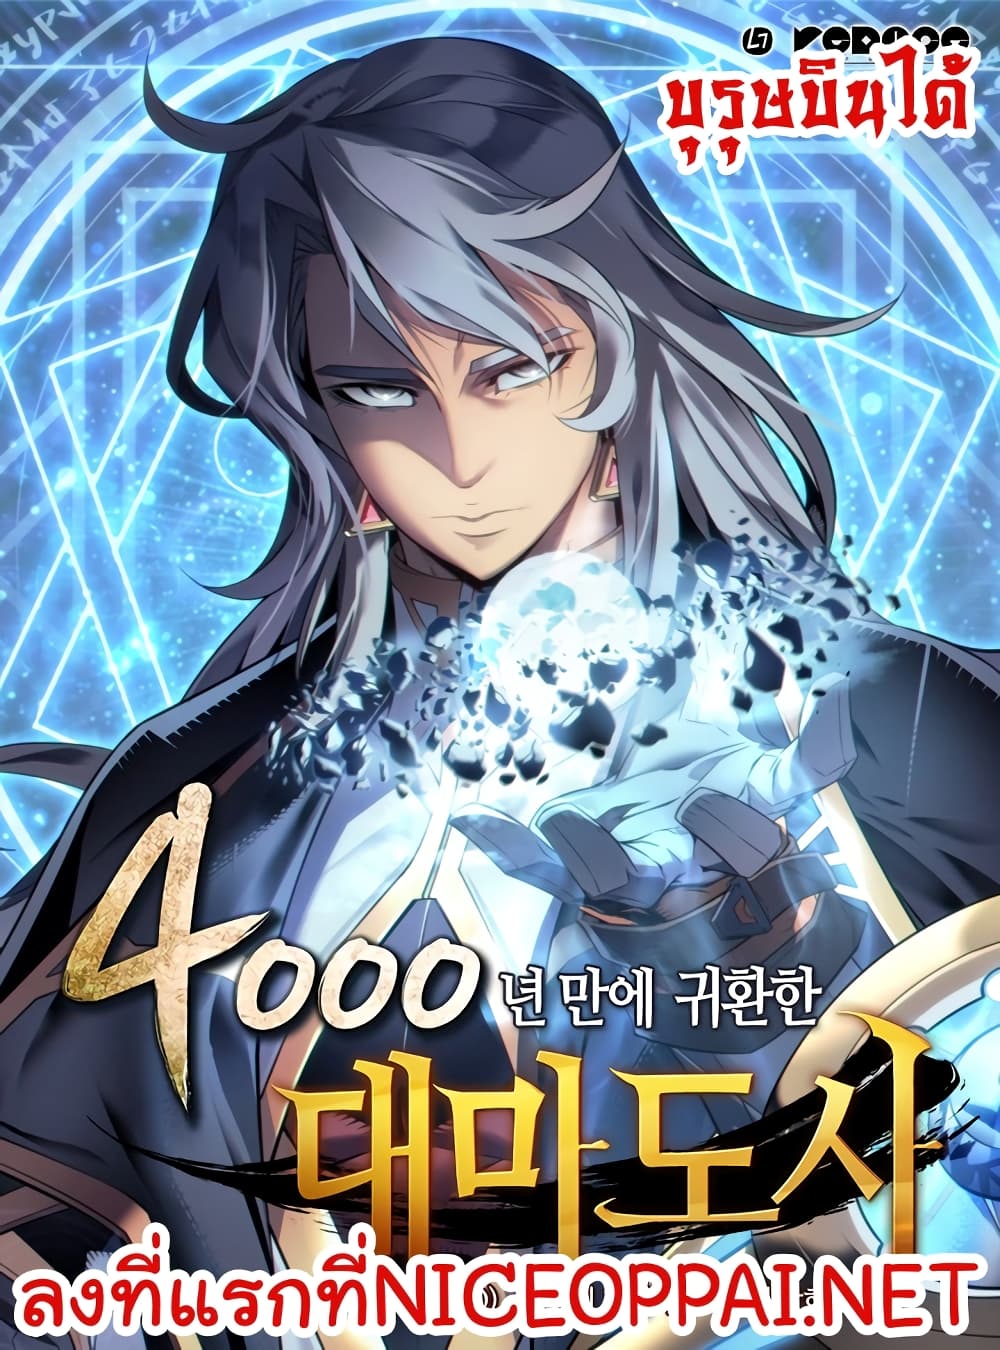 The Great Mage Returns After 4000 Years 32 (1)